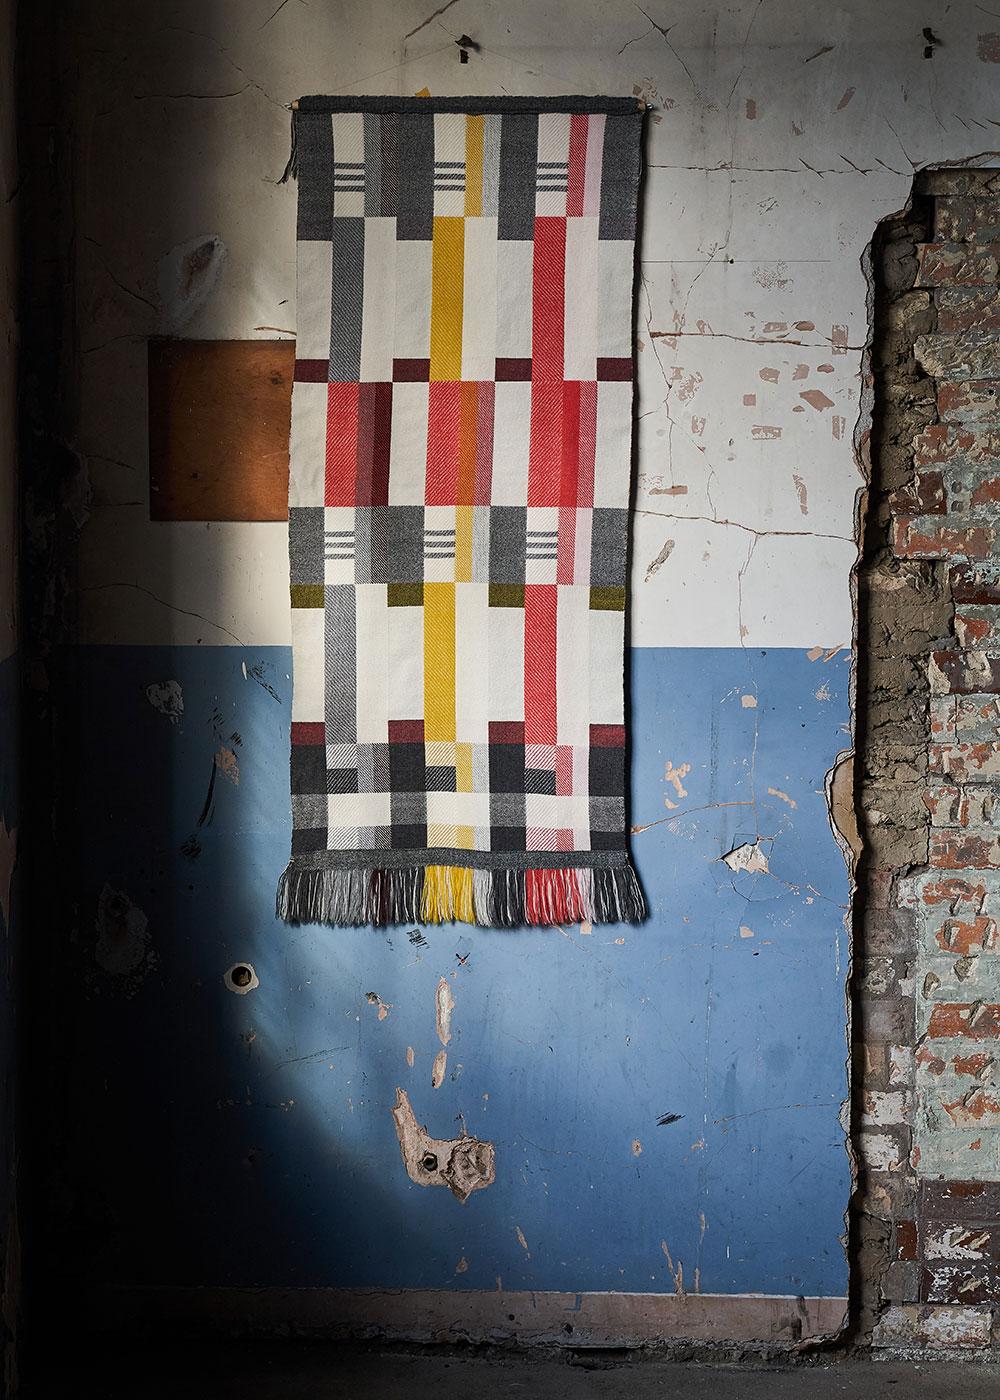 This striking contemporary piece of textile art can be displayed with either side facing, with or without the top fringe.

Handwoven on a dobby loom in Pamela's studio using a complex double cloth weaving technique and a combination of weave